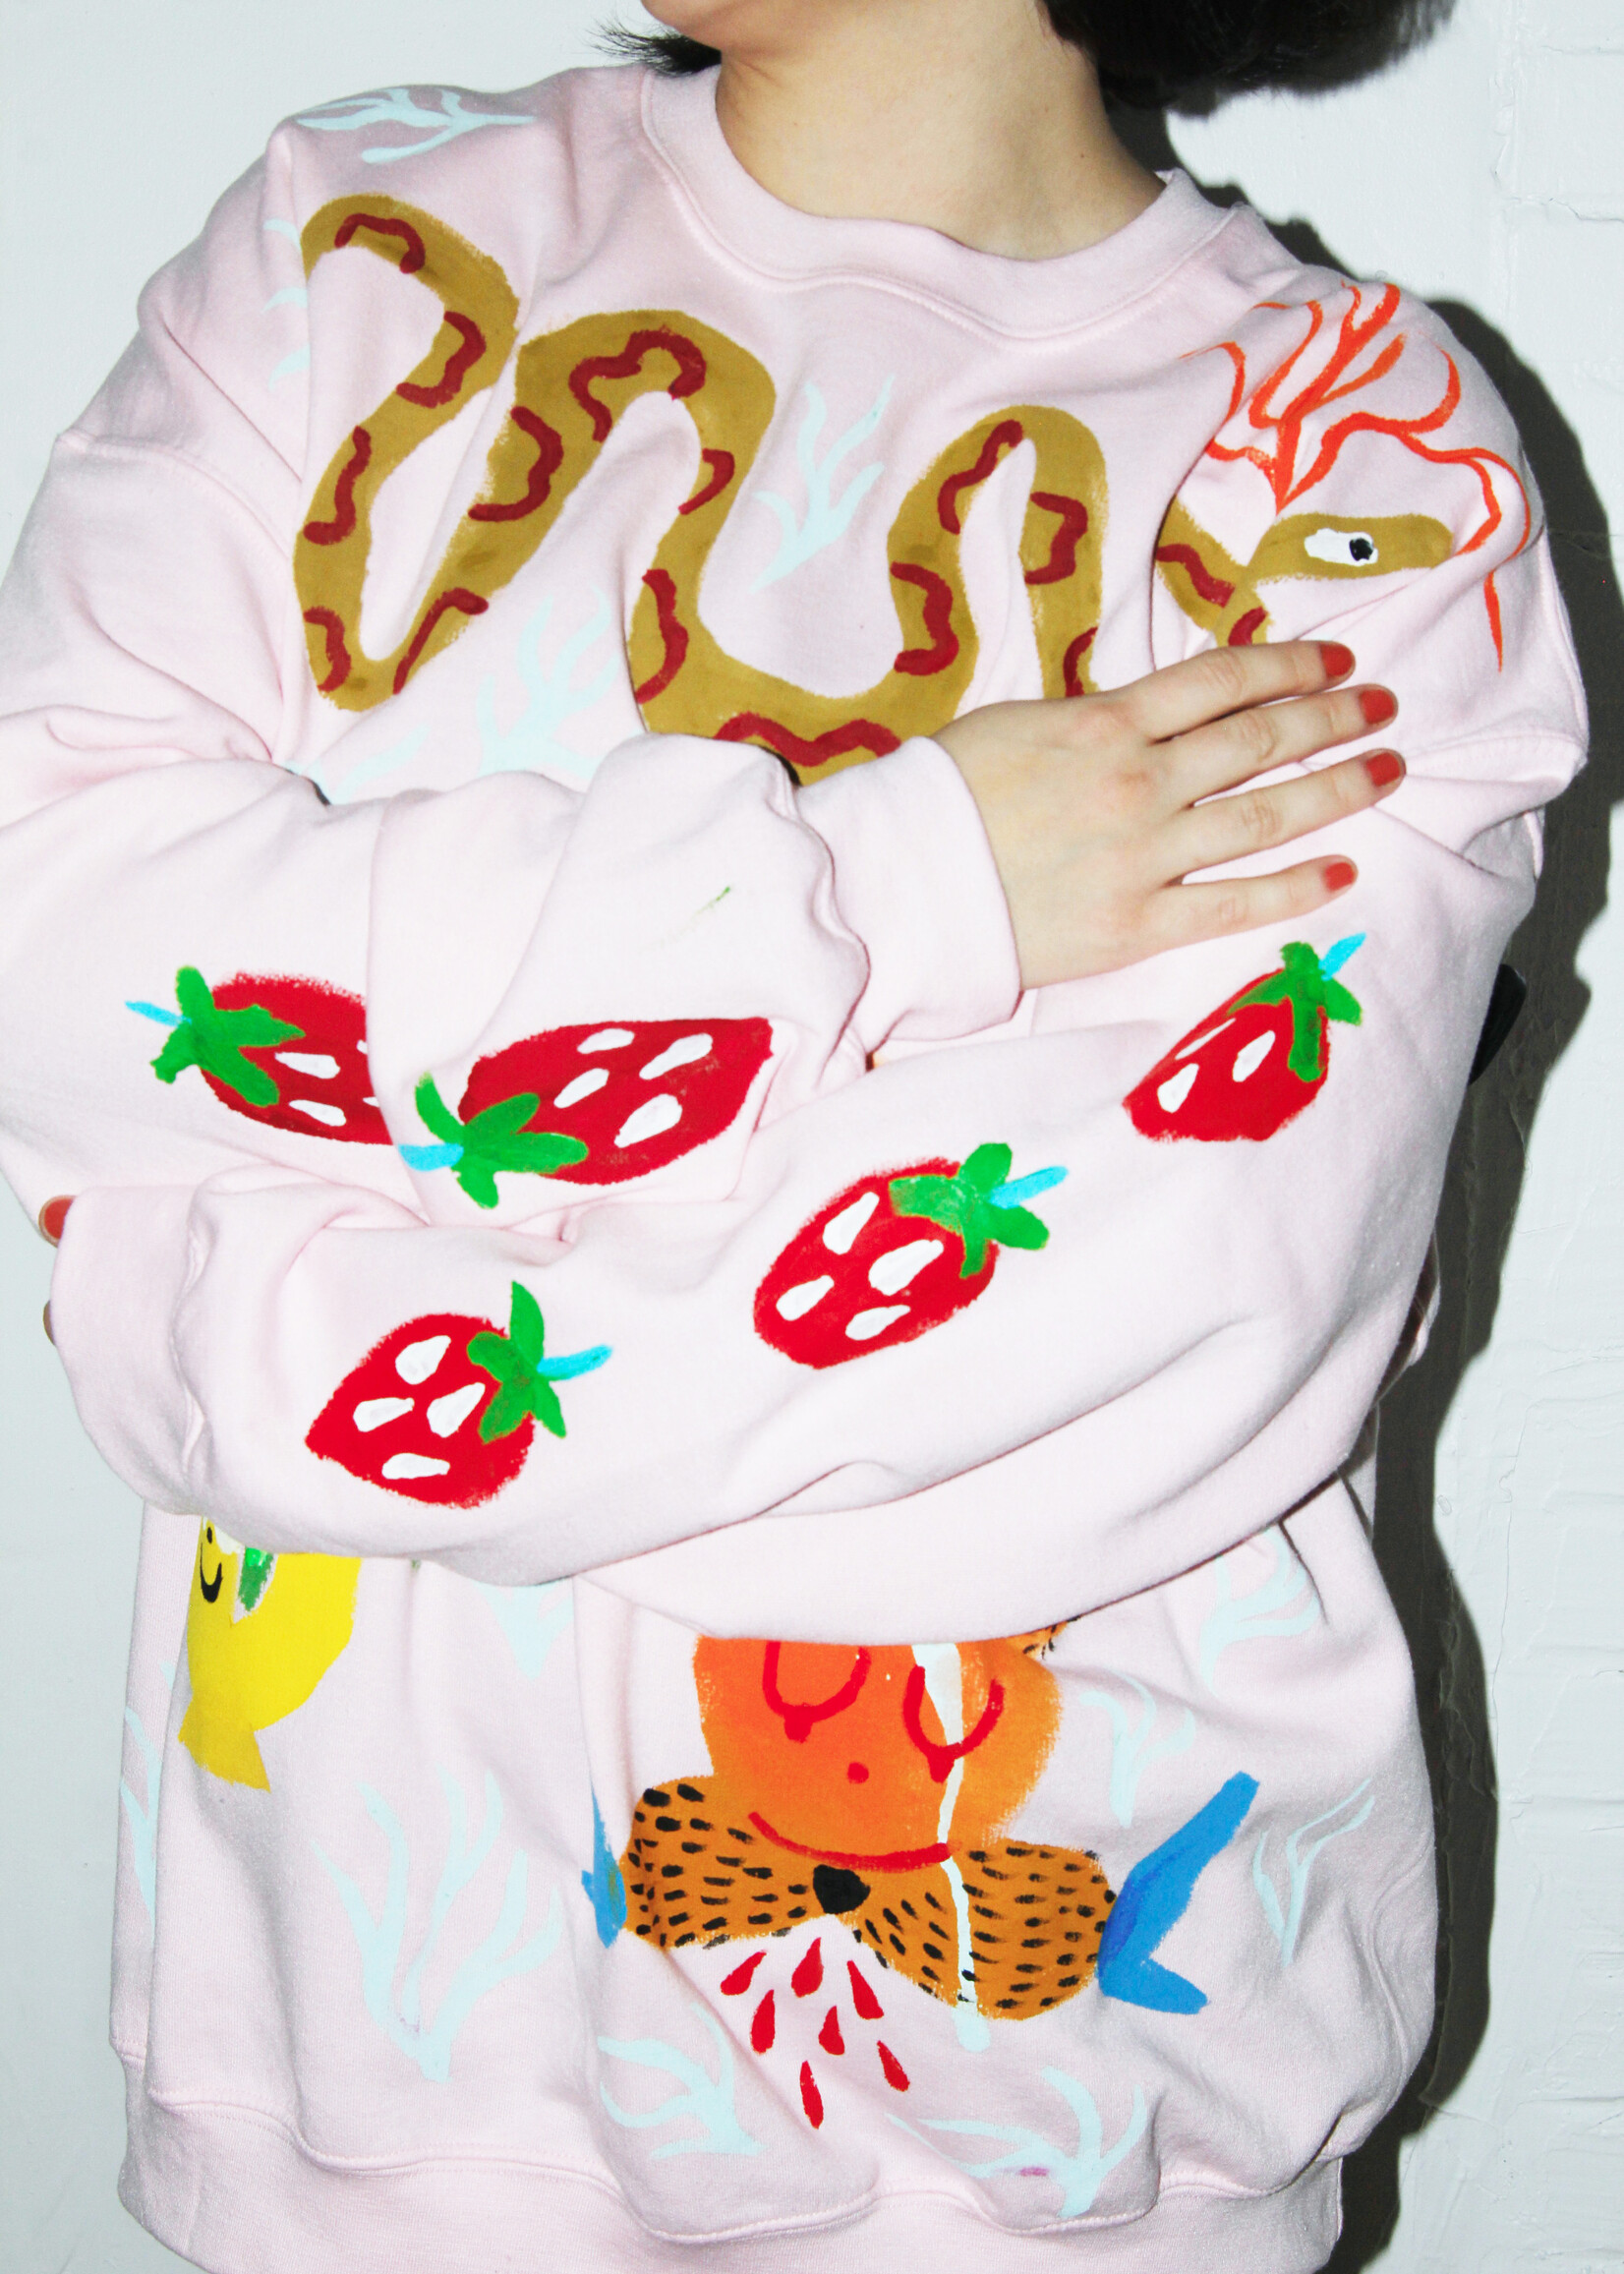 Char Bataille Char Bataille Hand Painted "Strawberry Sleeves" Crewneck